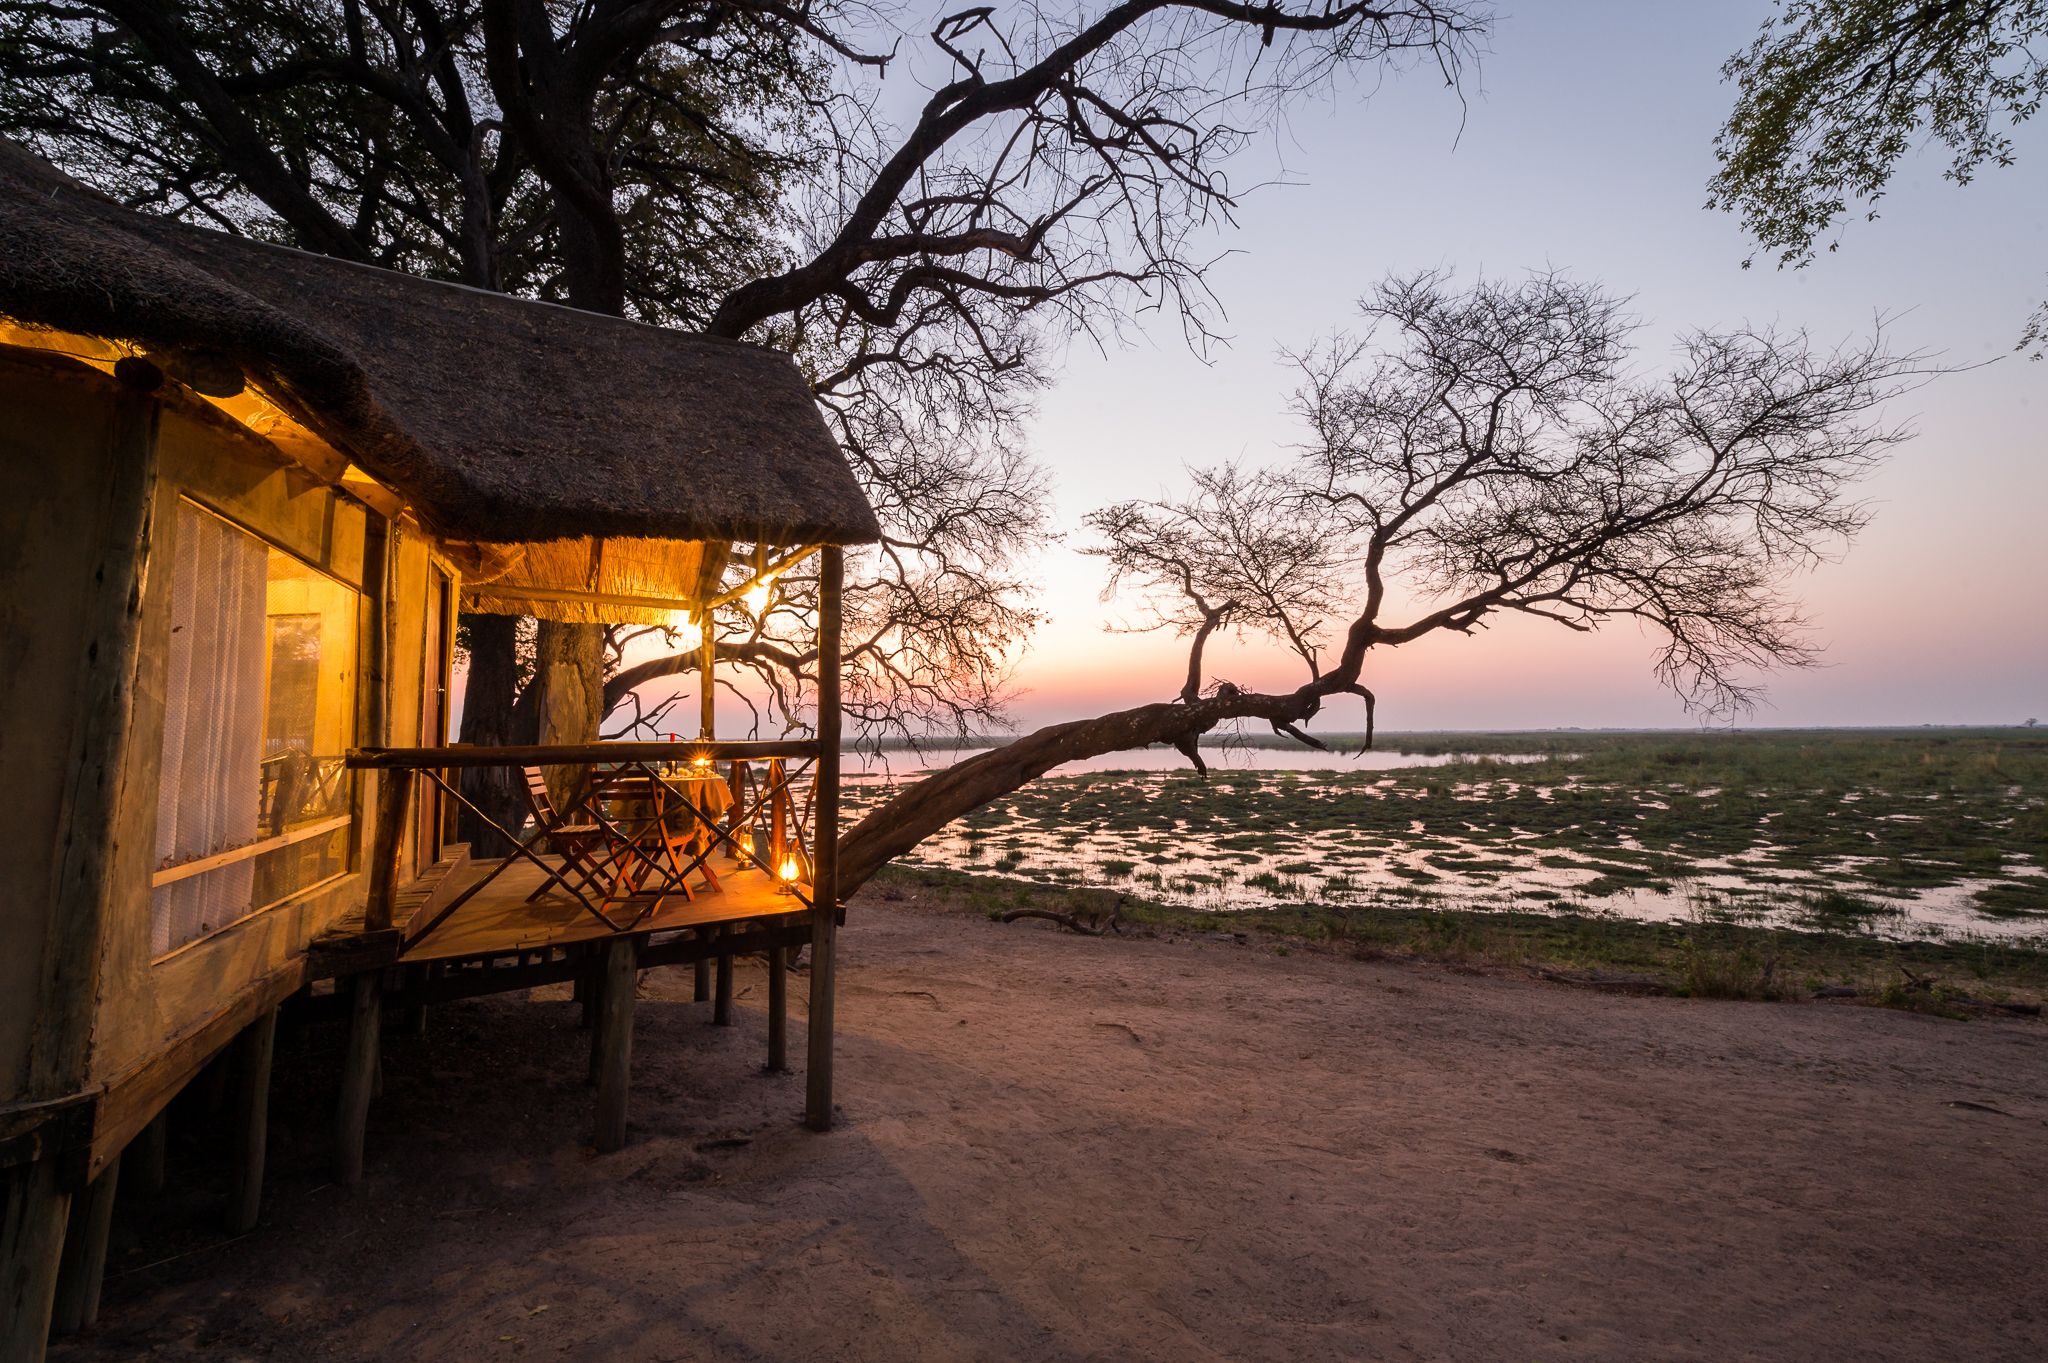 contact-camp-linyanti-to-experience-this-in-the-bushveld